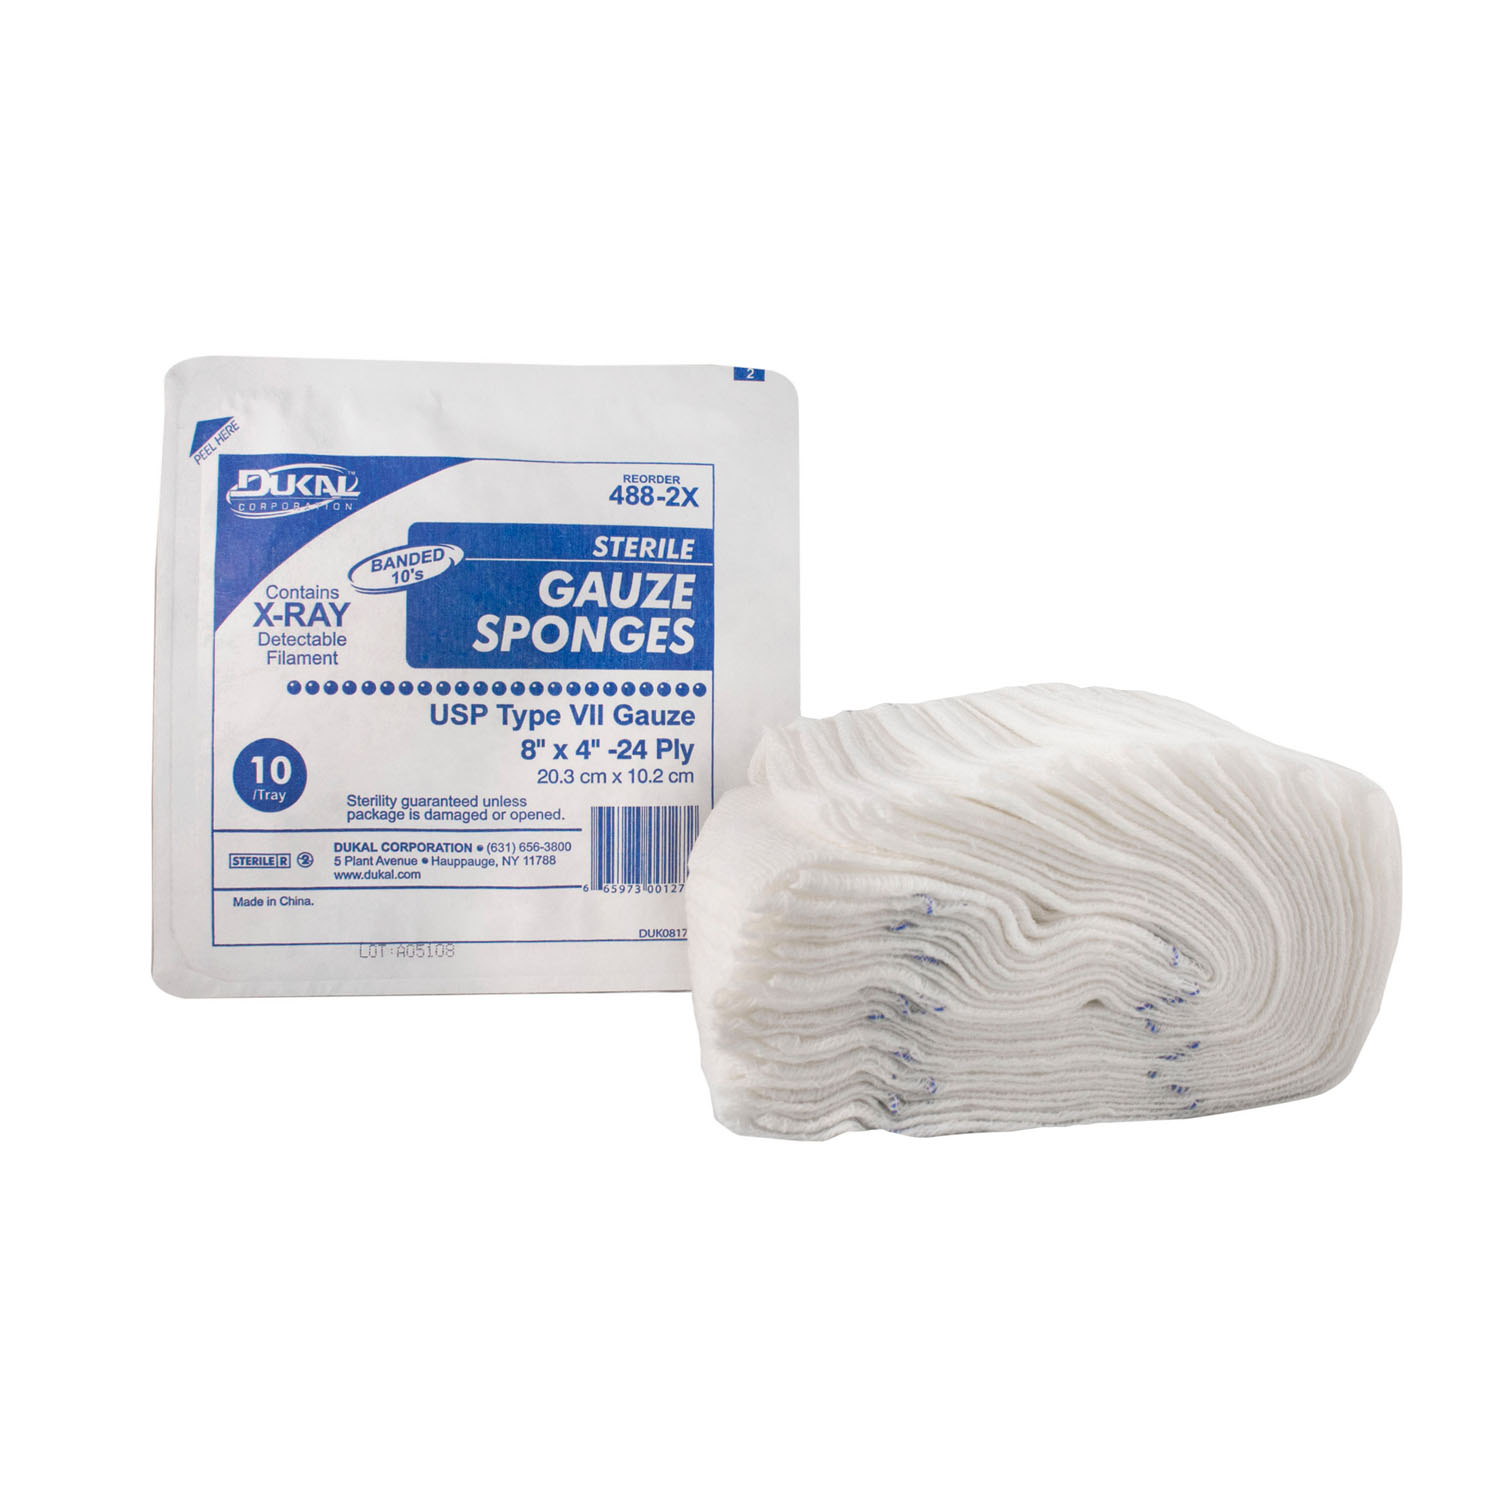 DUKAL X-RAY DETECTABLE GAUZE SPONGES : 488-2X TR $5.48 Stocked